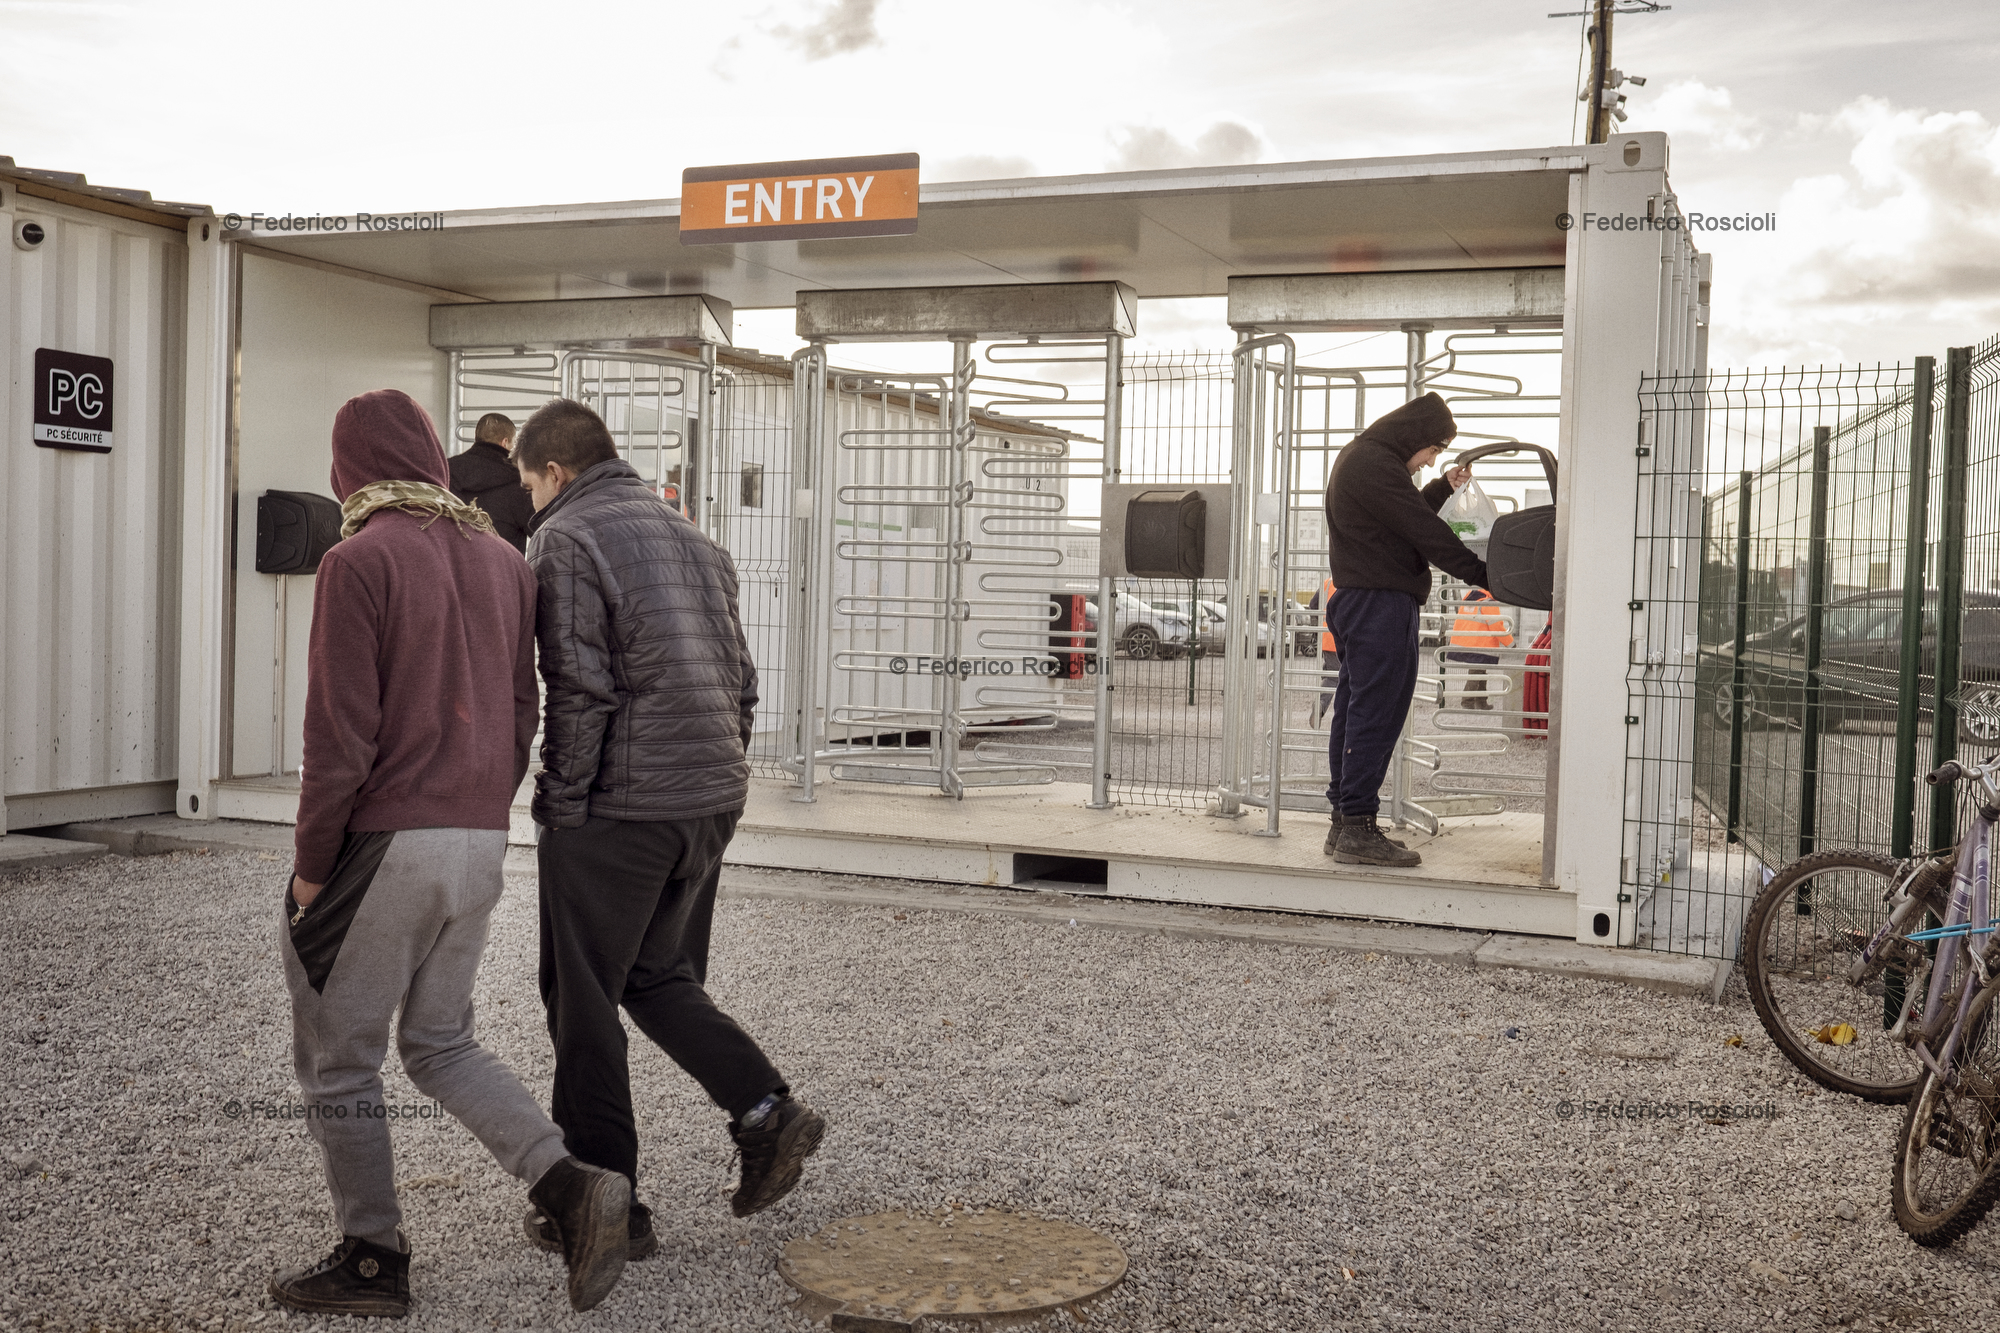 Calais, France. February 28, 2016. Entrance of the container area inside the camp. This area was built in January 2016, it is accessible only by fingerprints and once in you lose the chance of reaching the UK.